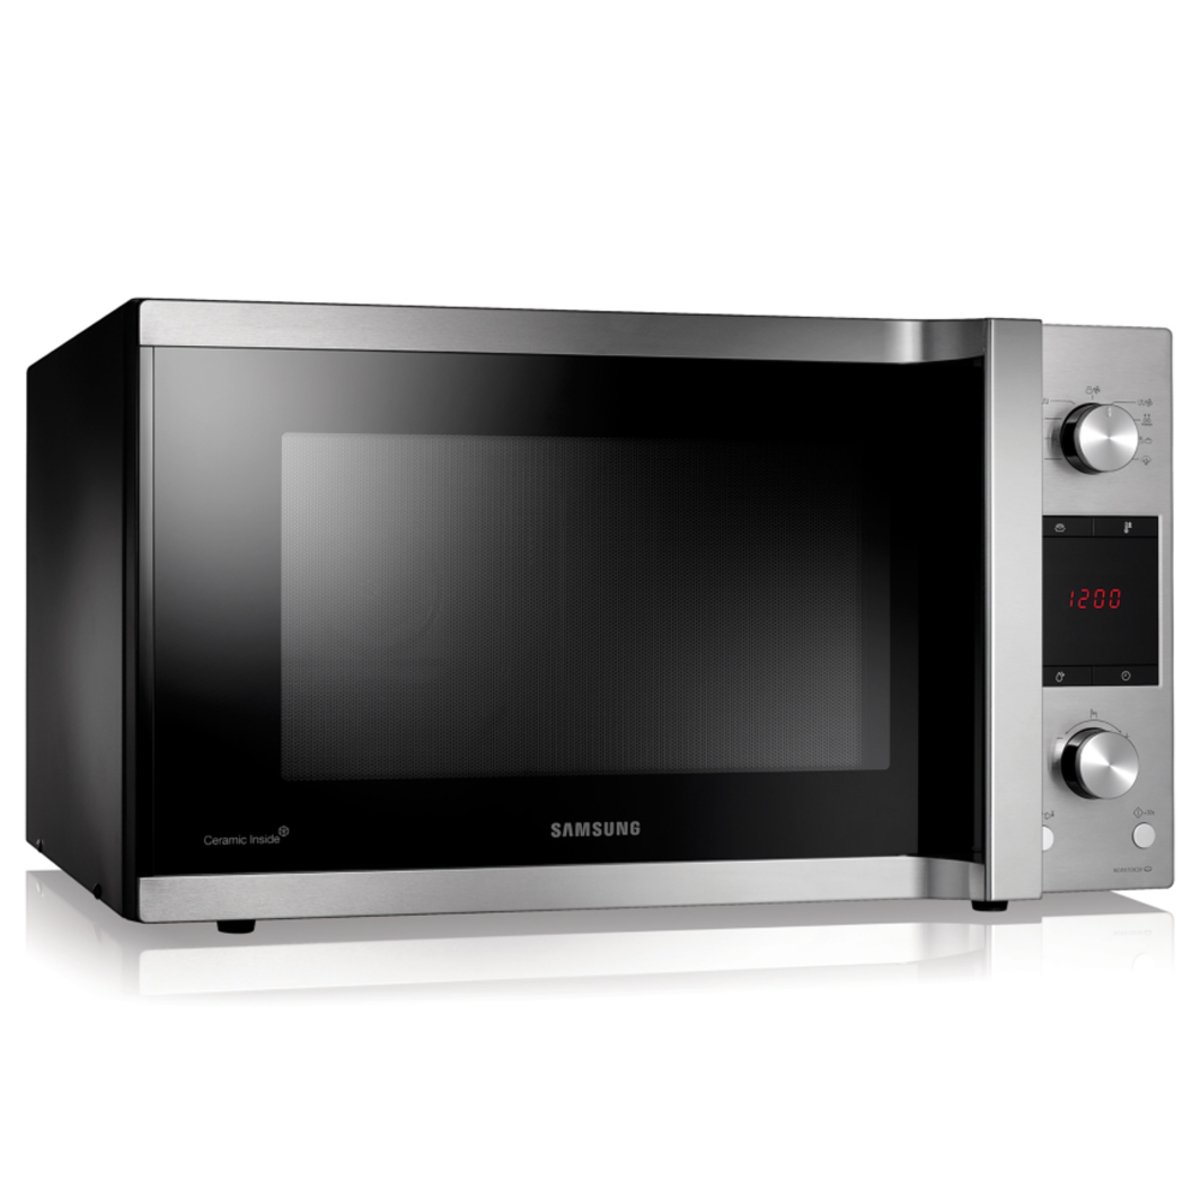 Samsung Microwave Oven MC455TH 45 Ltr